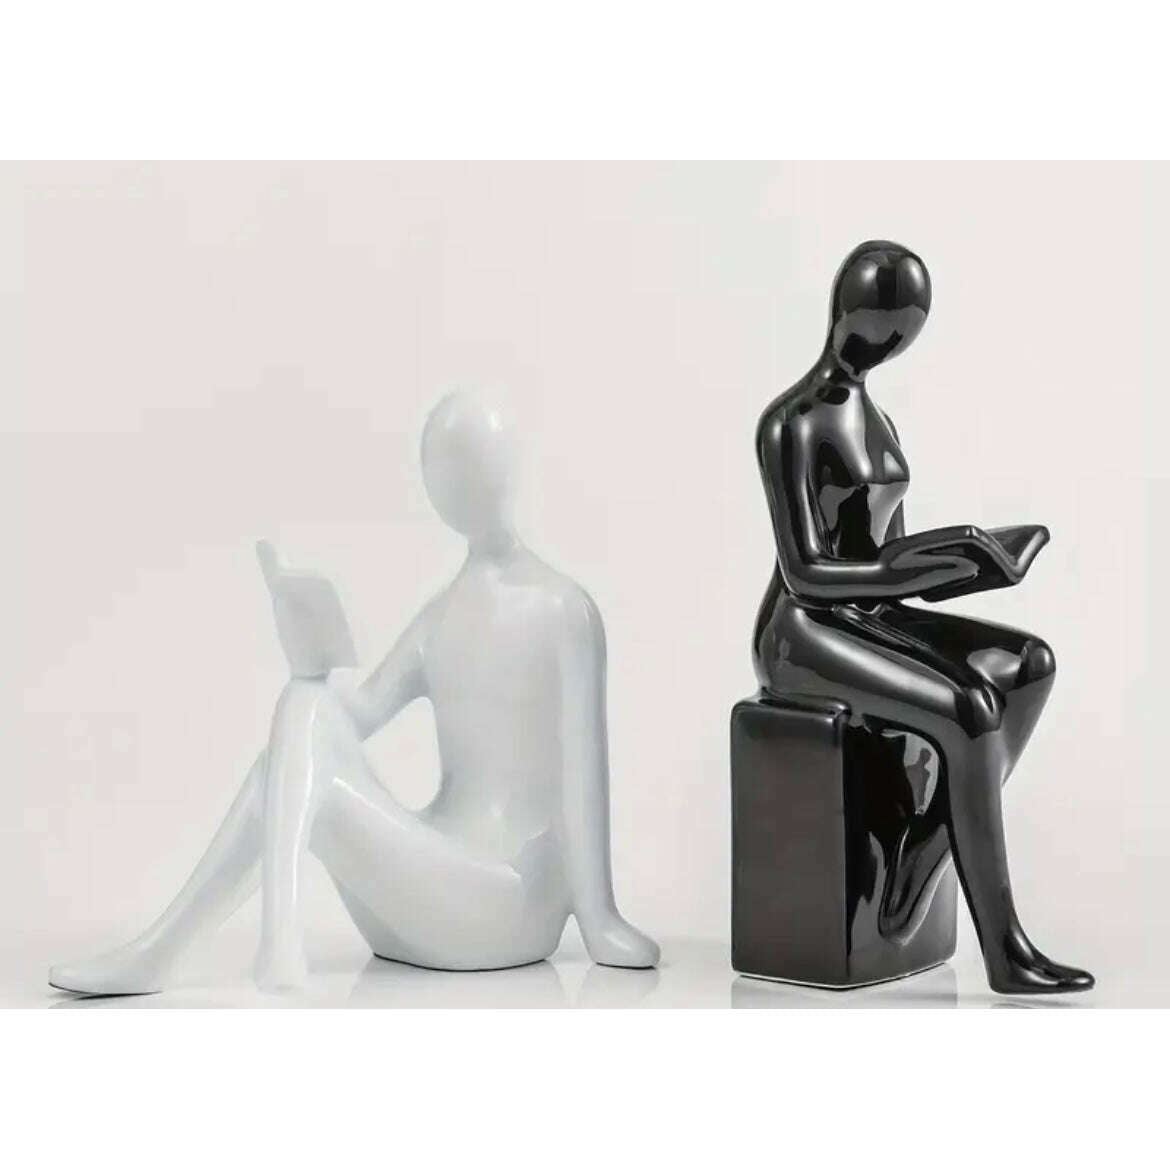 Impodimo Living & Giving:Together Monochrome Bookends:Swing Gifts